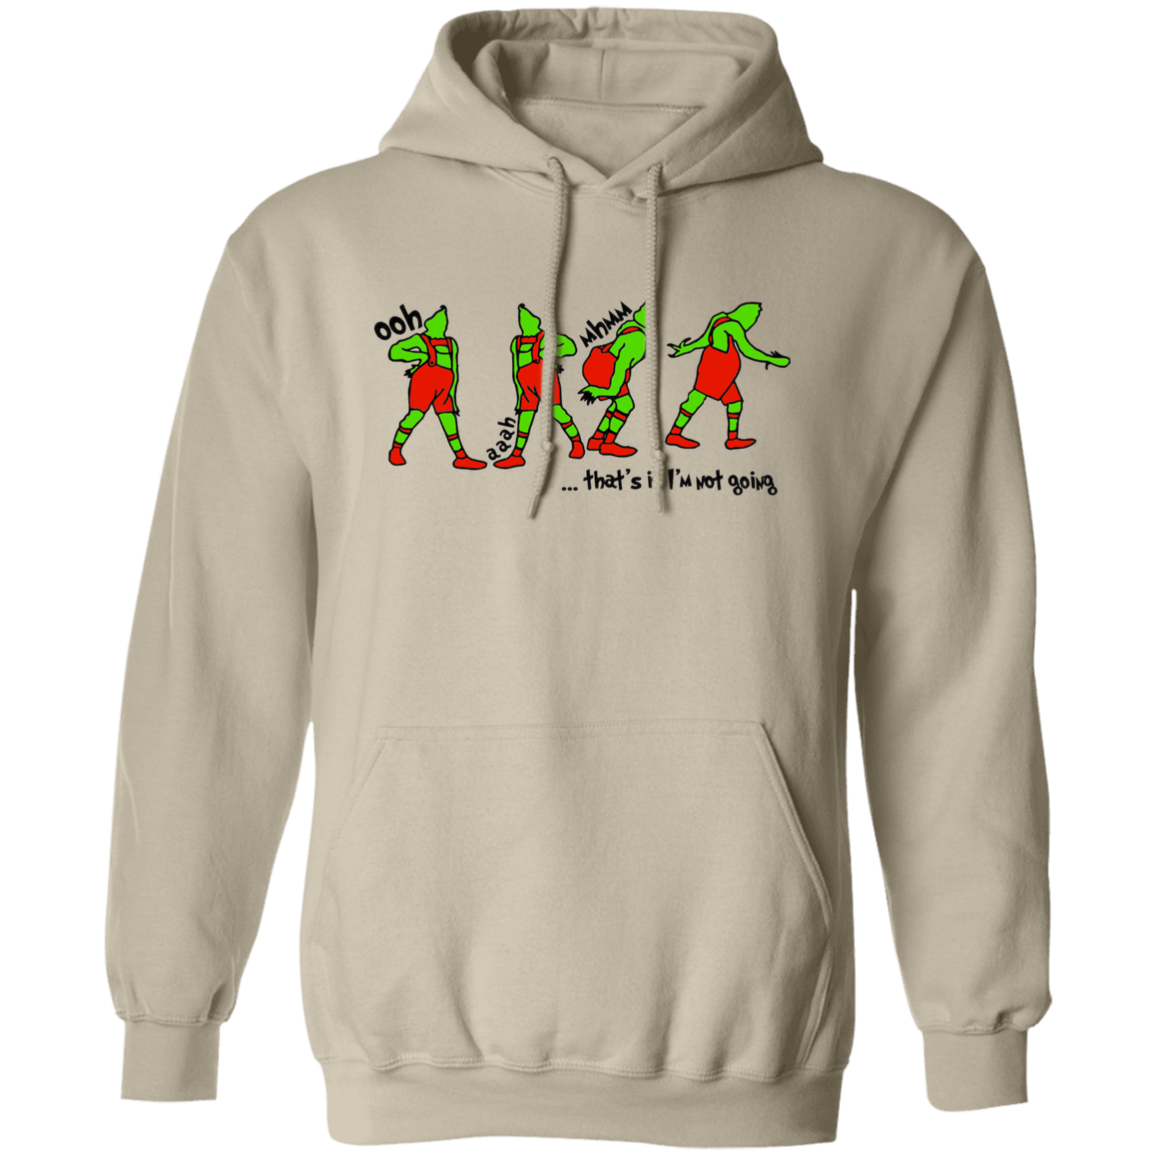 The Grinchmas Pullover Hoodie